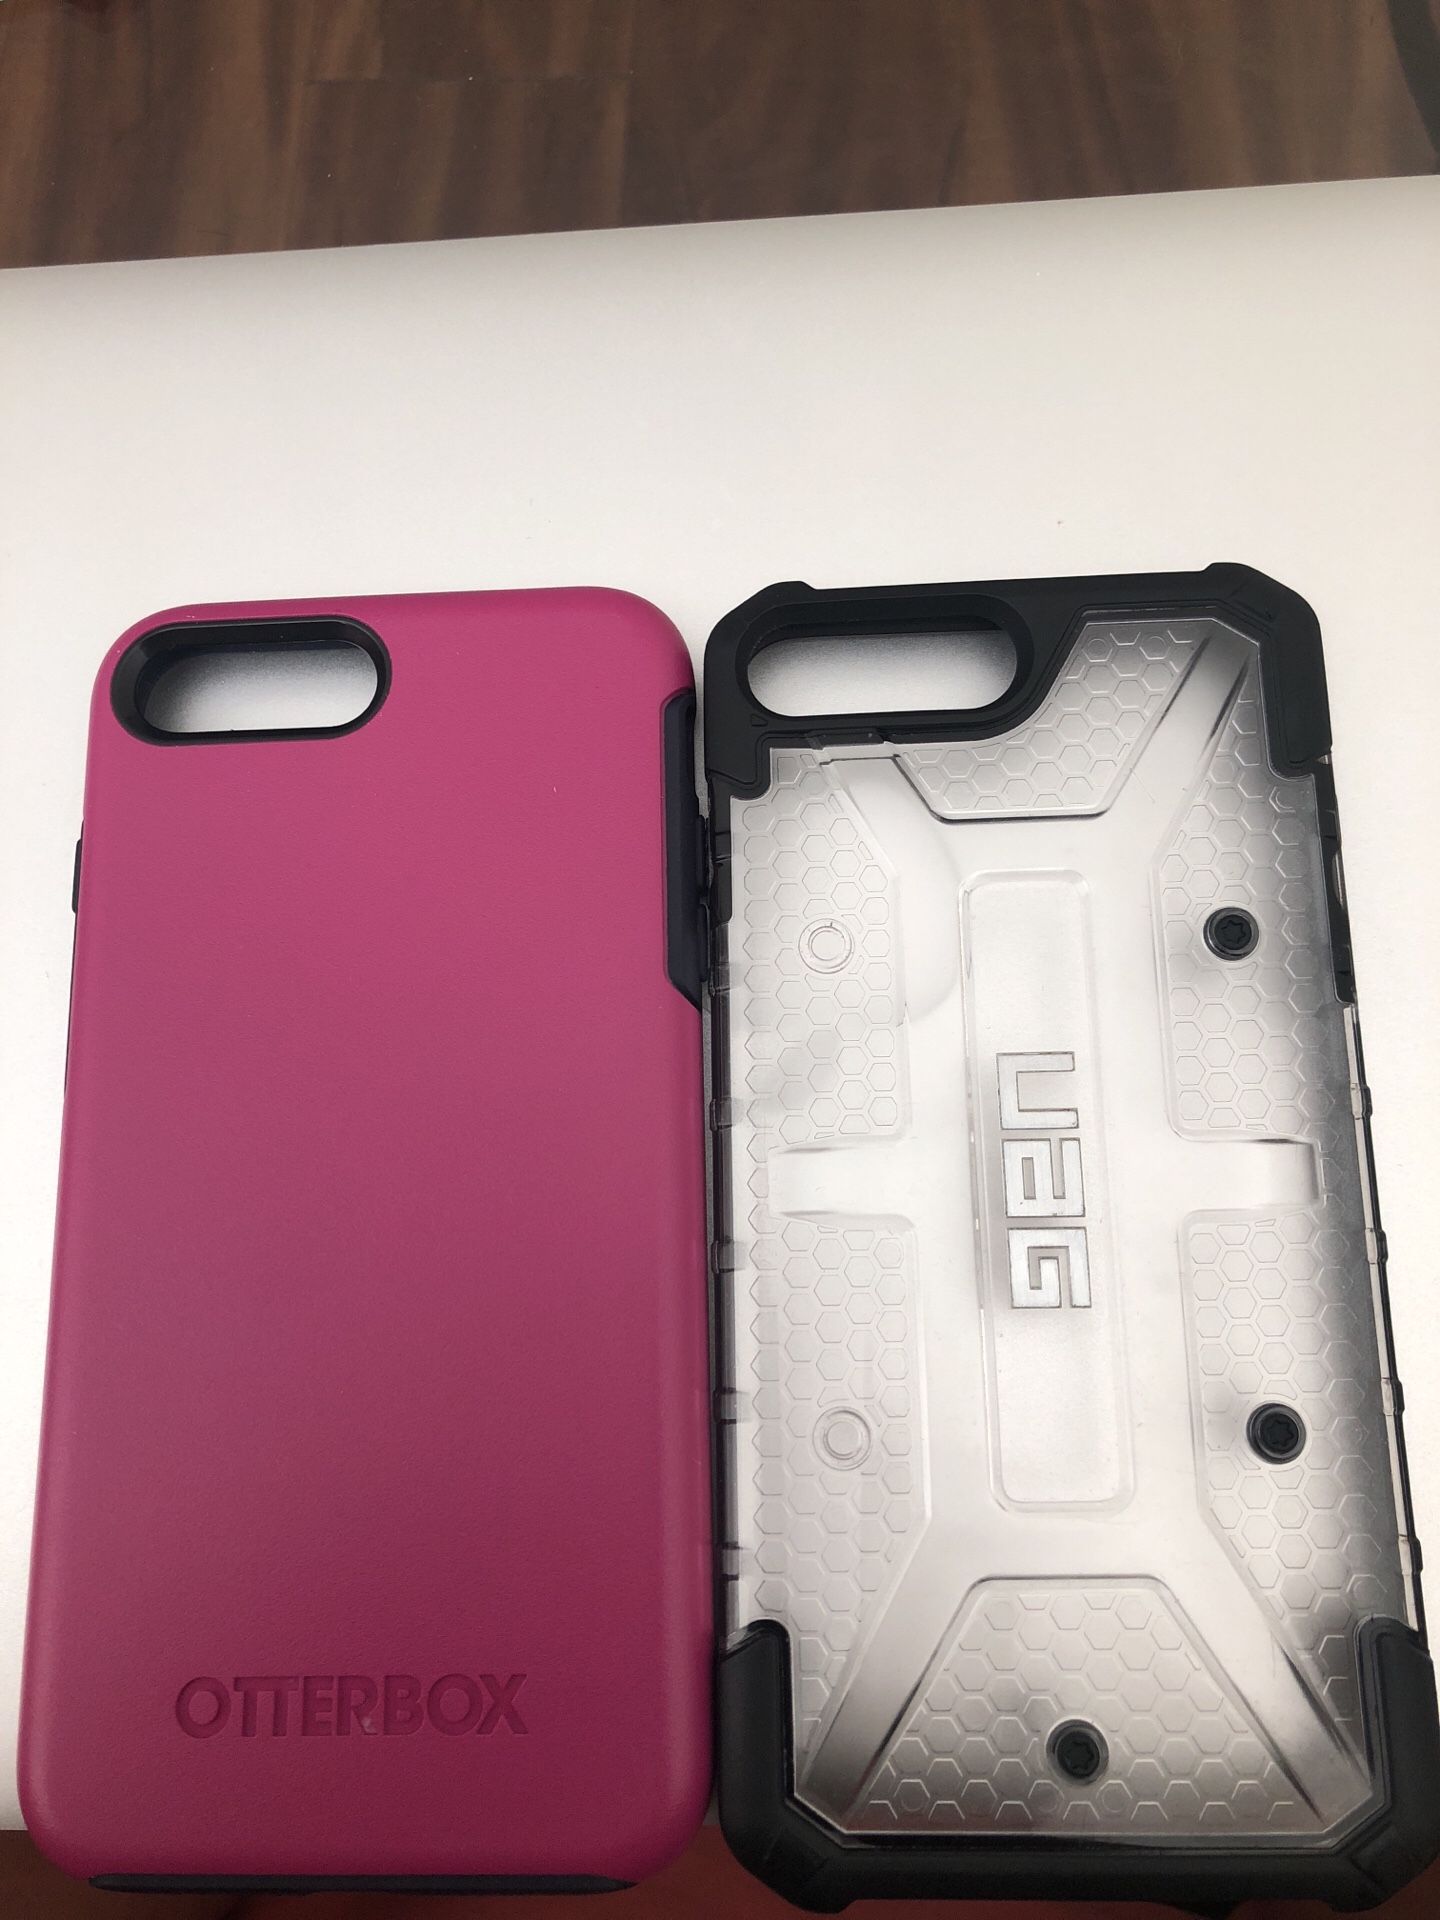 Otterbox and UAG IPHONE 8 Plus Phone Cases-$25 each or both for $40!